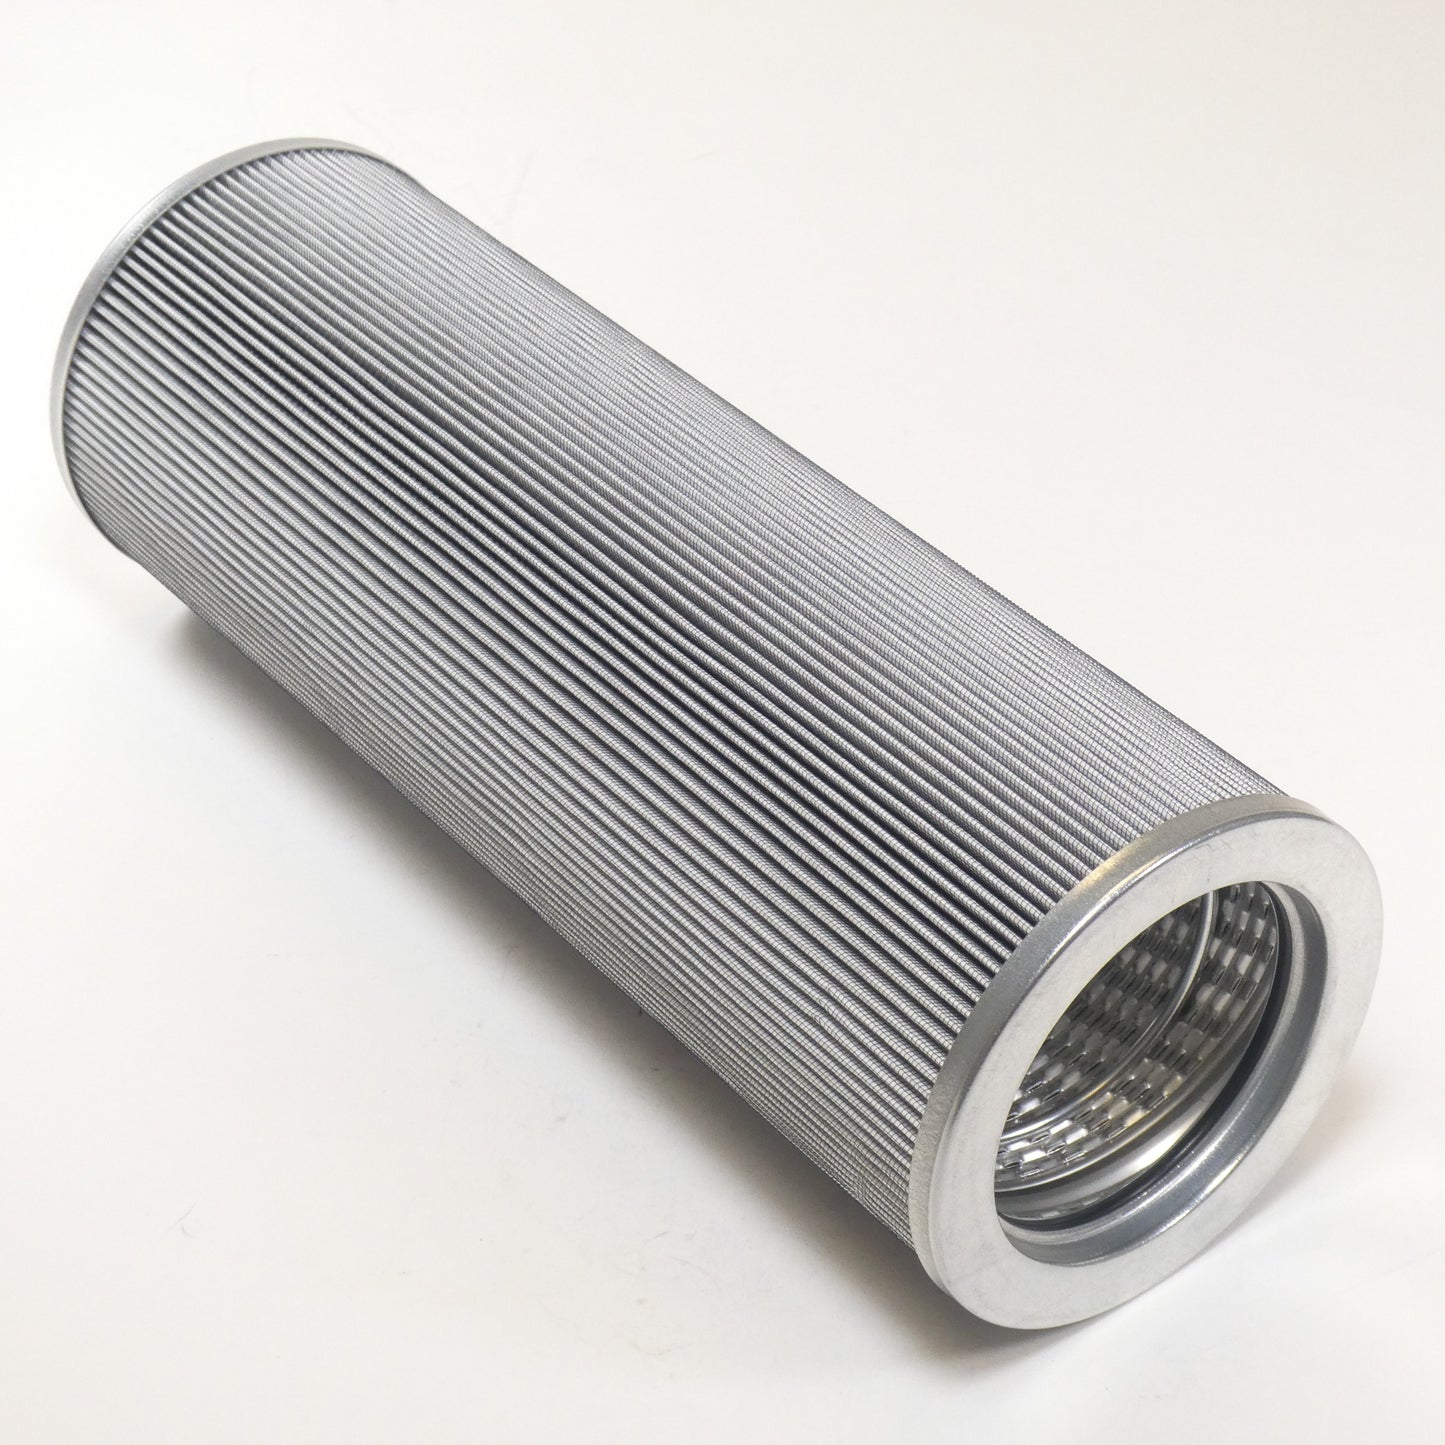 Hydrafil Replacement Filter Element for Mahle 891029SMX6